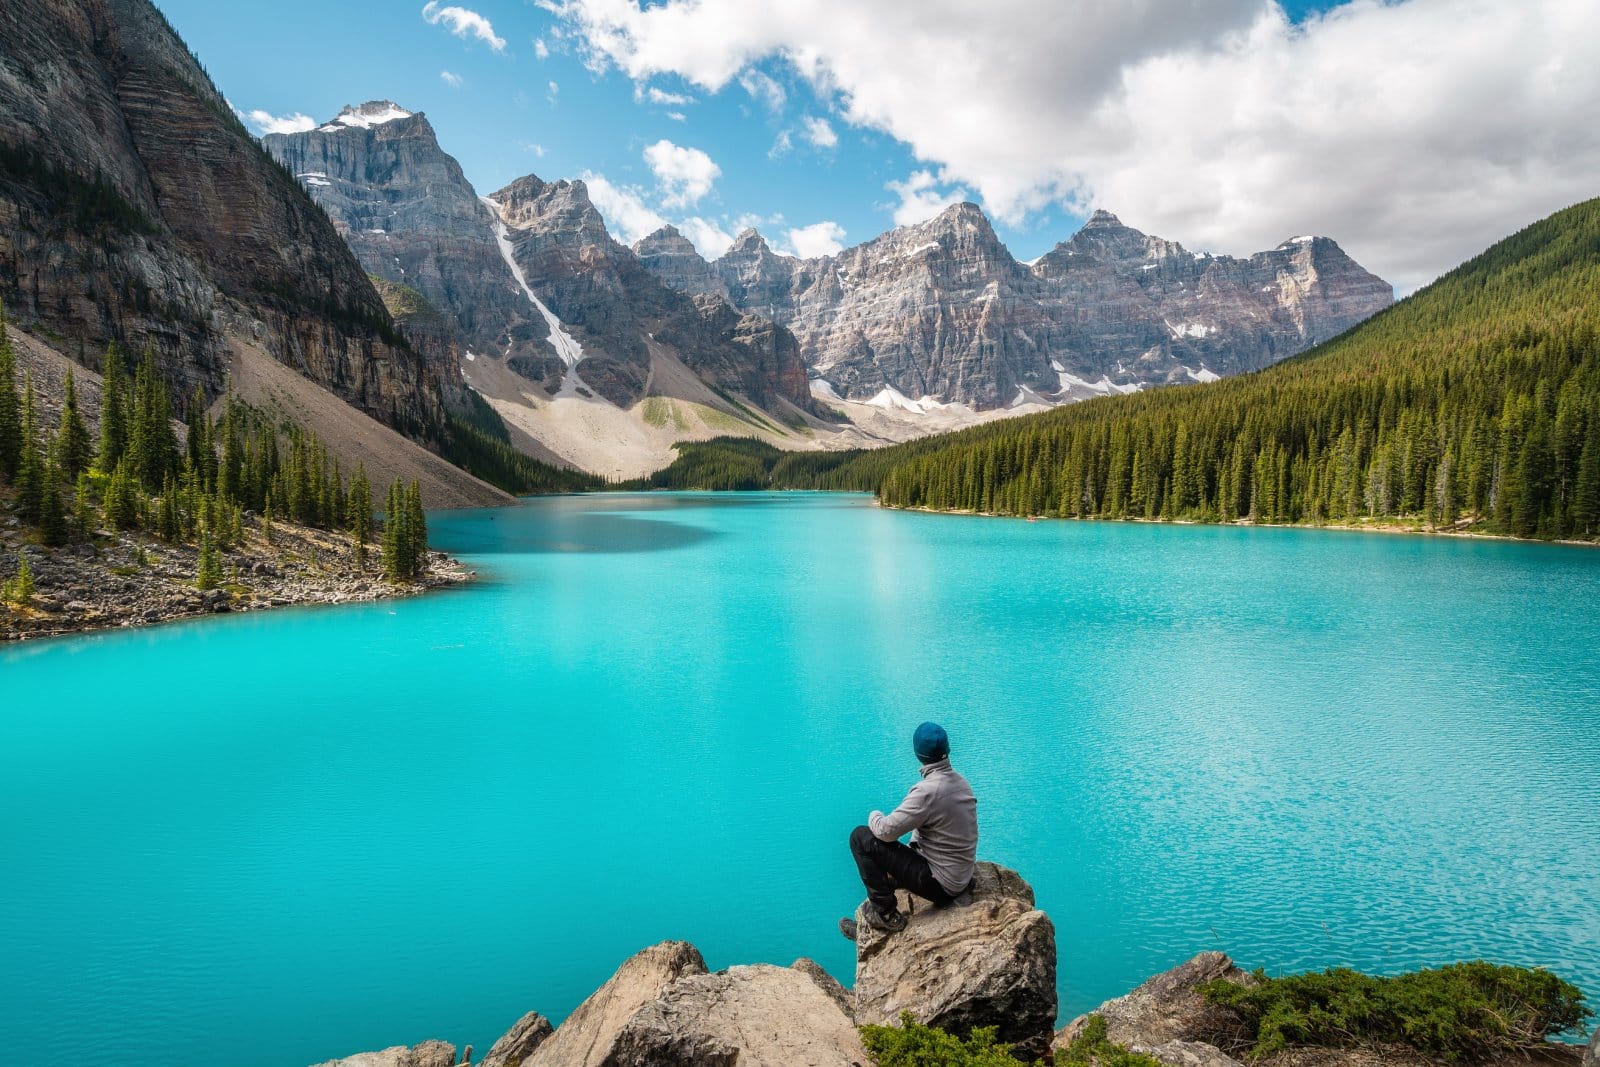 Image Credit: Shutterstock / R.M. Nunes <p>Enjoy Calgary’s laid-back vibe, with weekends spent hiking in nearby national parks, attending outdoor concerts in the summer, and cheering on the local hockey team at the Saddledome. Explore the city’s thriving craft beer scene, with visits to microbreweries and beer festivals celebrating Alberta’s brewing heritage.</p>